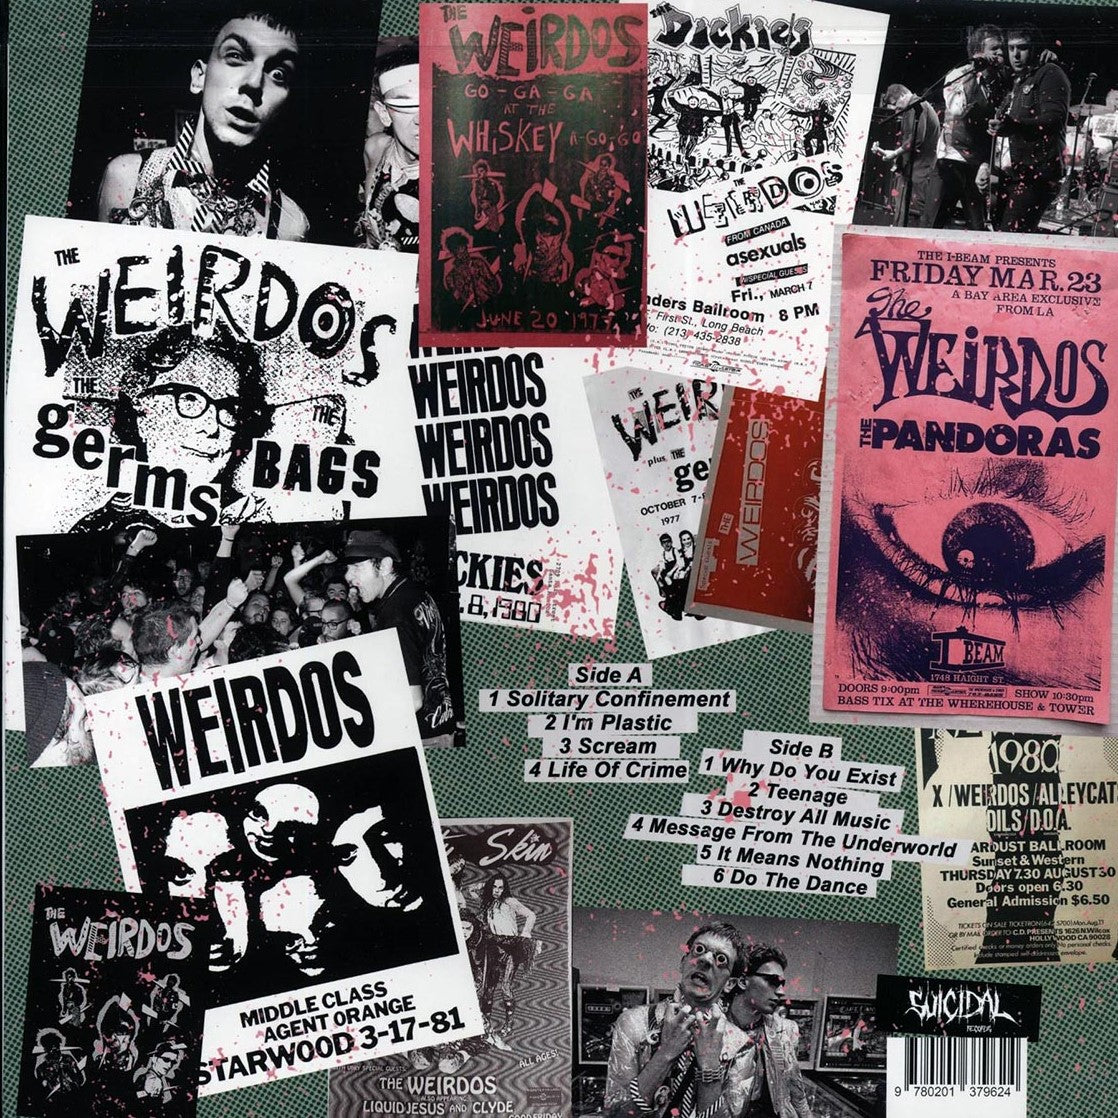 WEIRDOS – Live At The Whisky, Hollywood 10/16/1977 LP